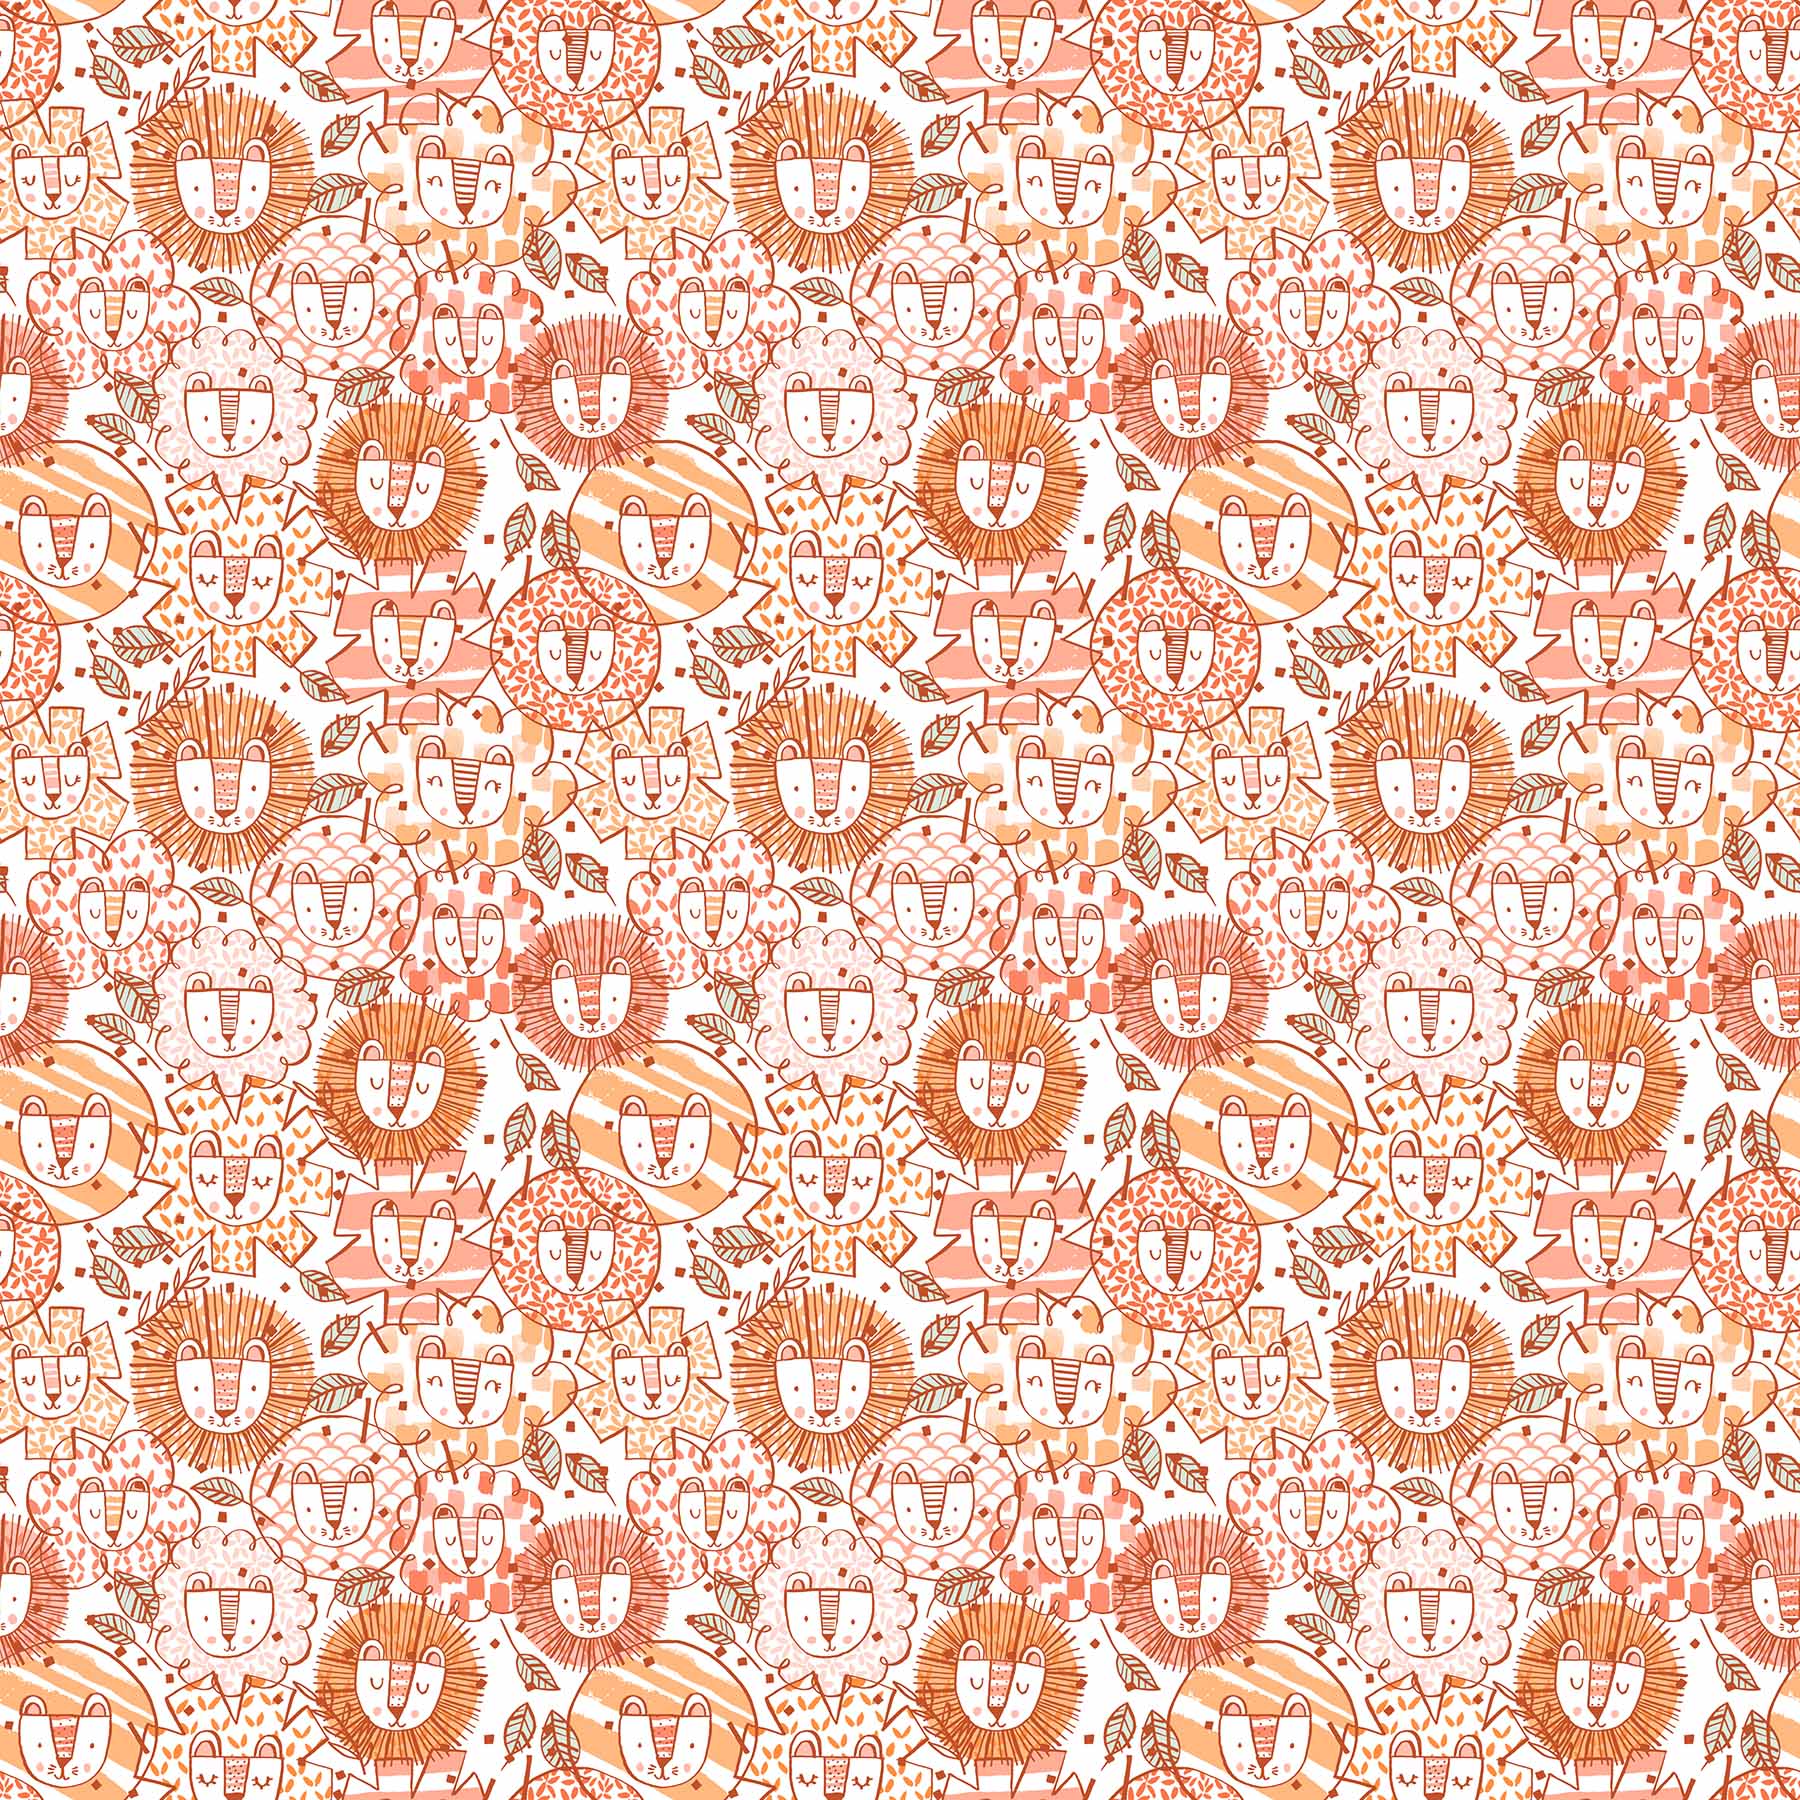 Lions on Coral - Weave & Woven